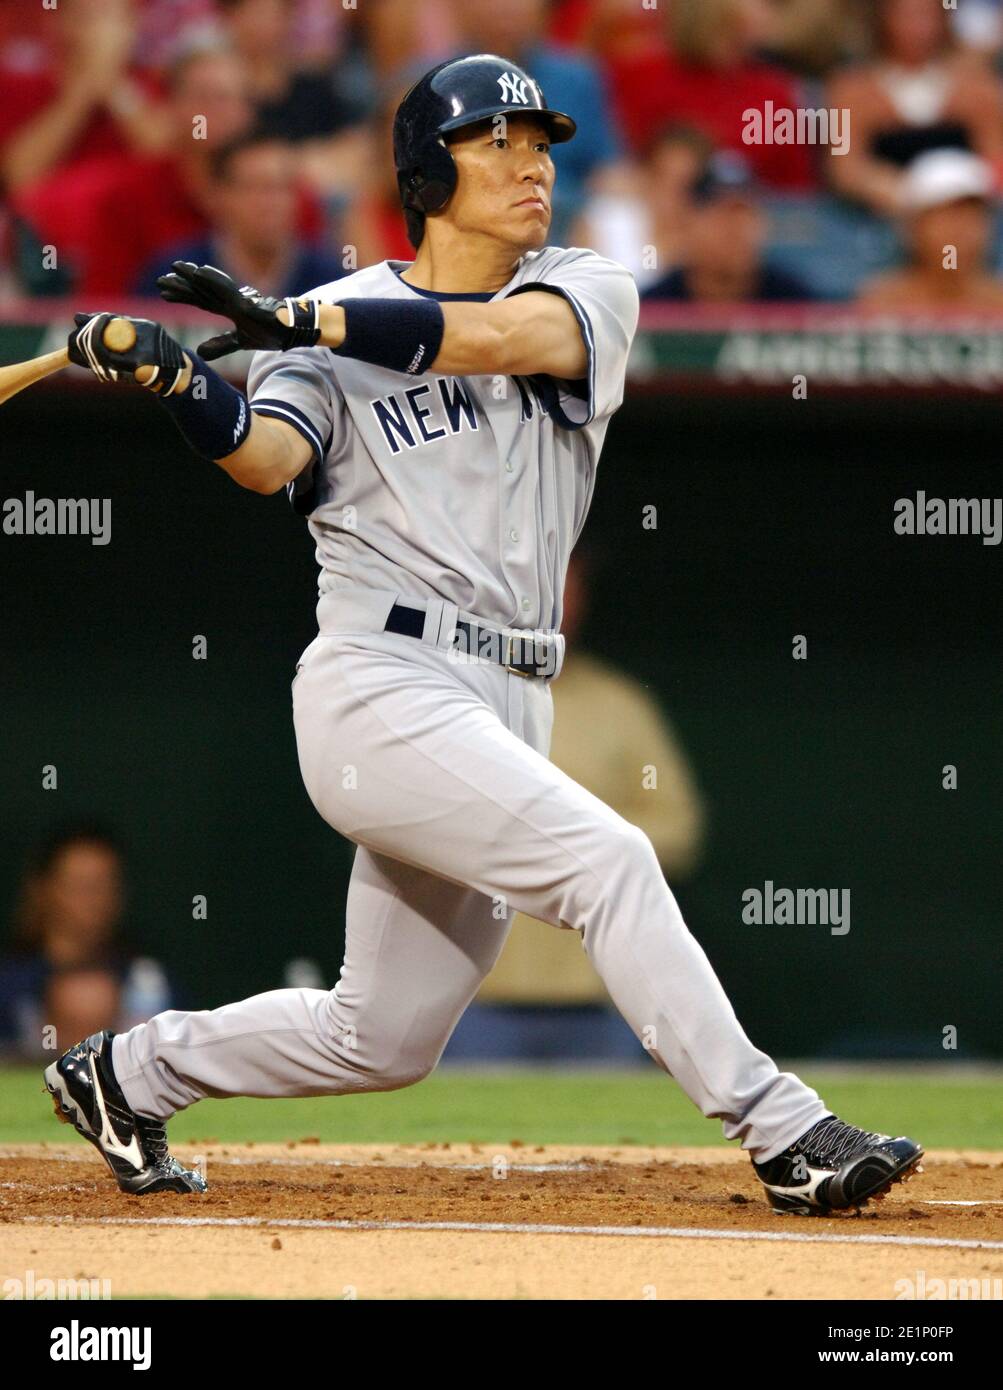 Hideki Matsui of the New York Yankees bats during 8-6 loss to the Los Angeles Angels of Anaheim at Angel Stadium in Anaheim, Calif. on Saturday, July Stock Photo